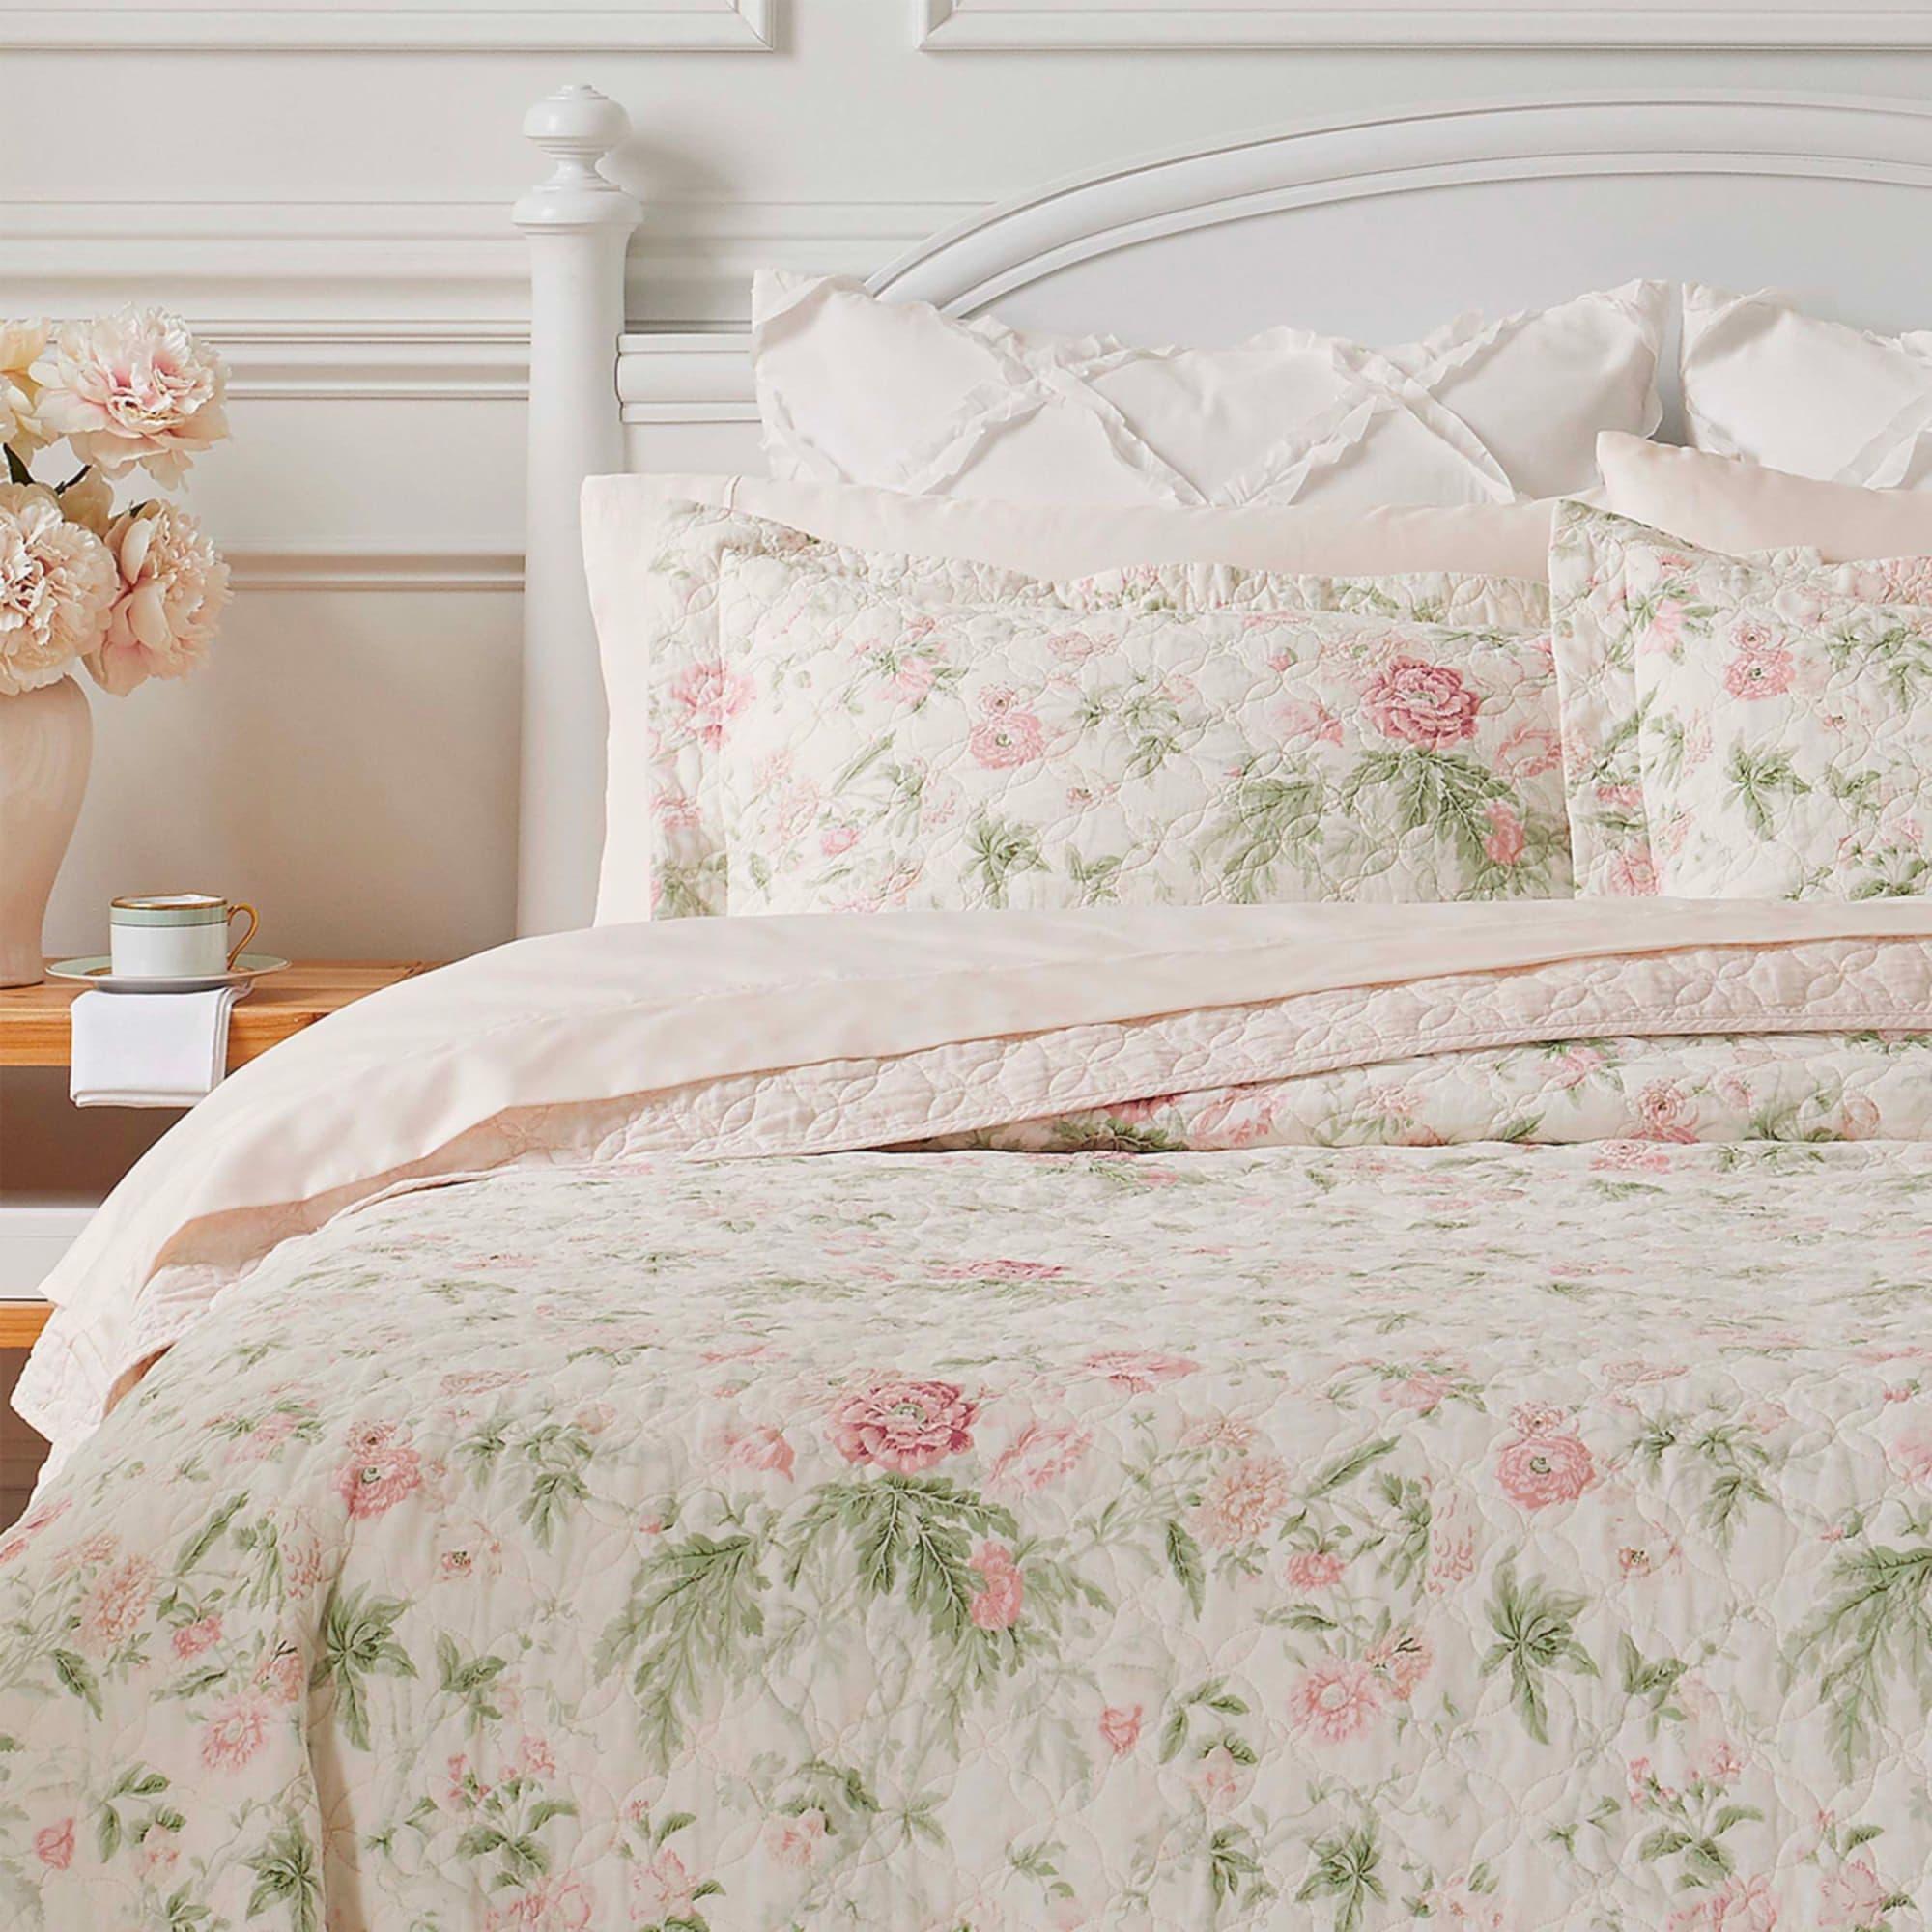 Laura Ashley Breezy Floral Printed Coverlet Set Queen Image 3